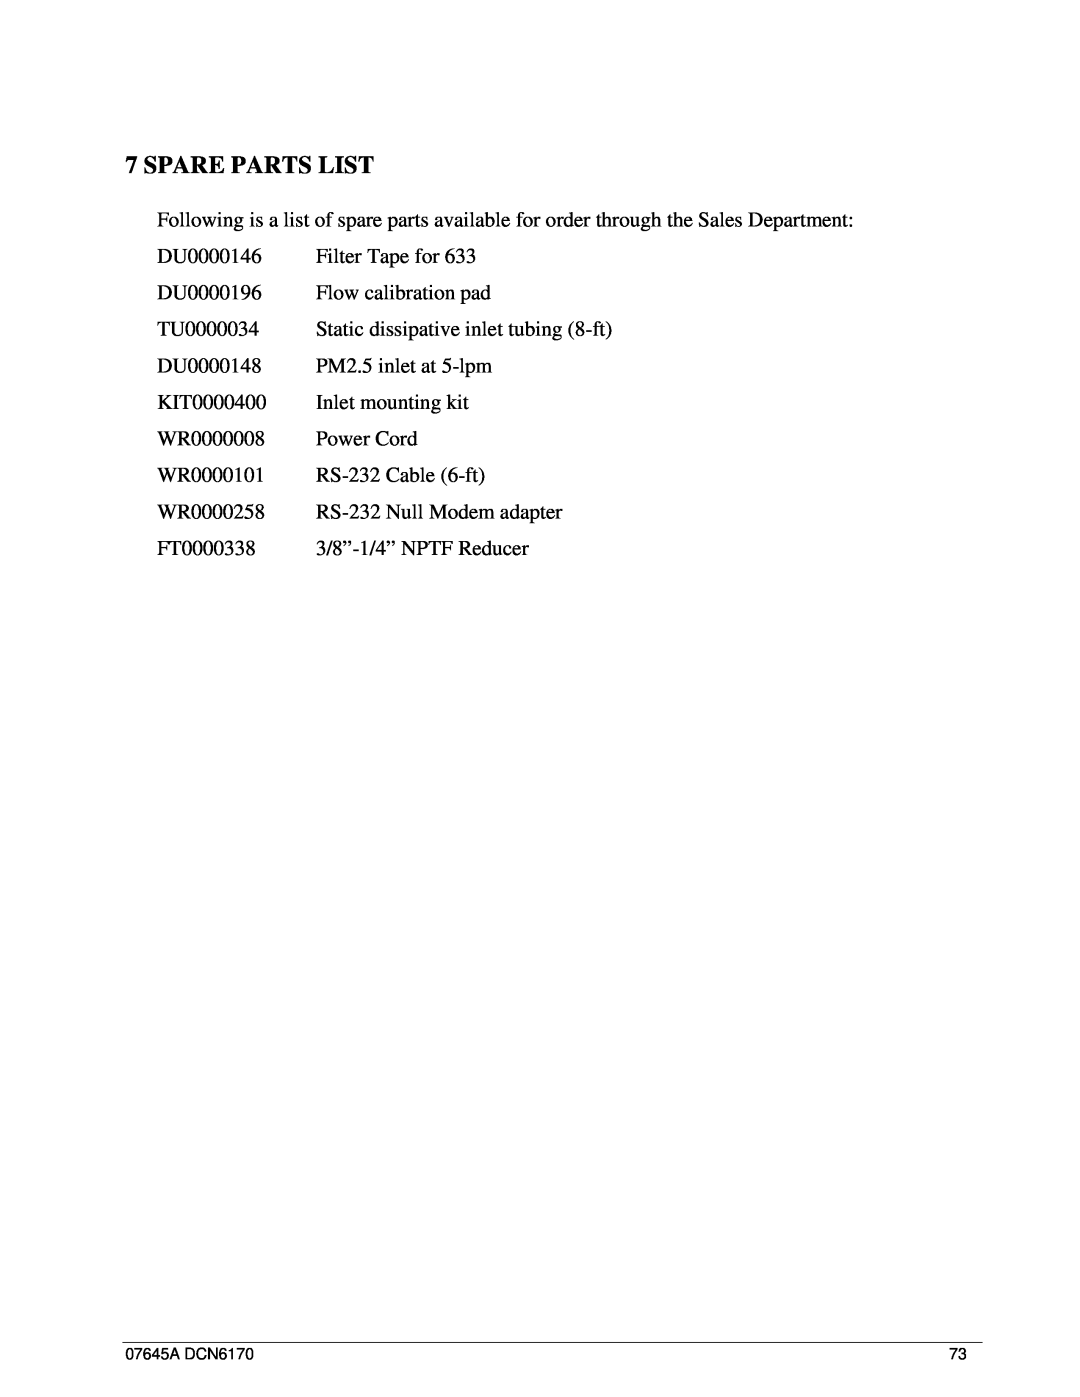 Teledyne 633 user manual Spare Parts List 